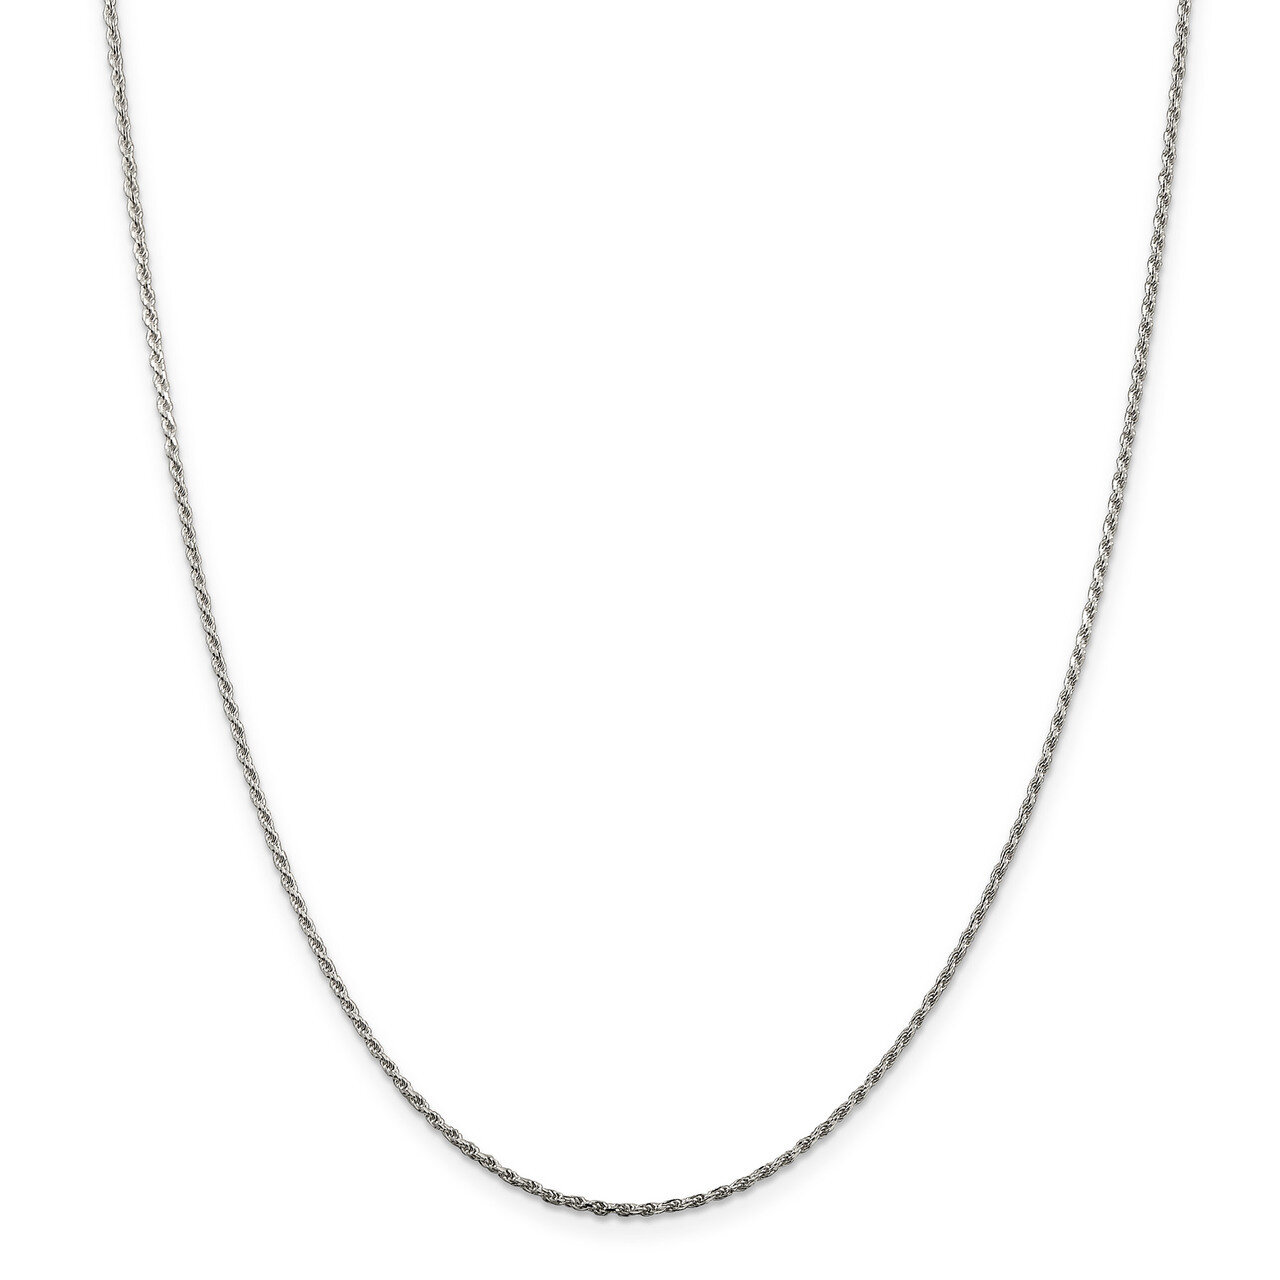 22 Inch 1.5mm Diamond-cut Rope Chain Sterling Silver QDC020-22